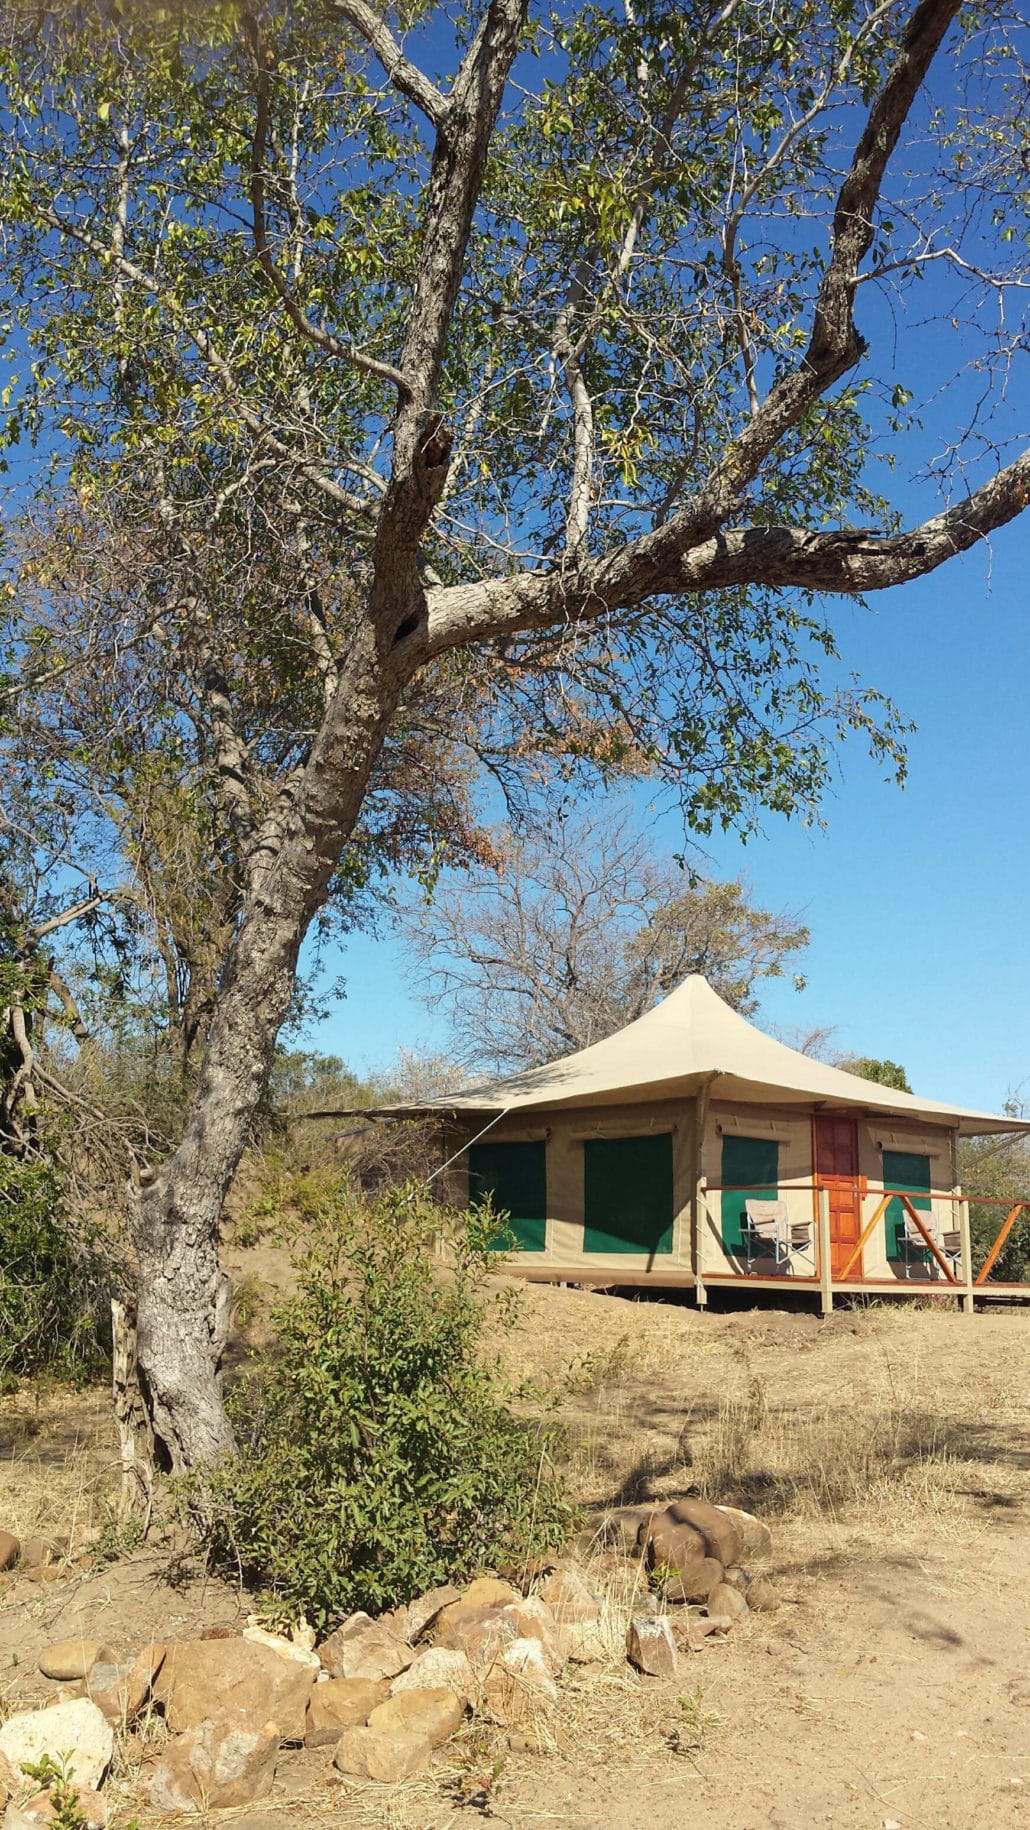 Tangala Safari Camp has four chalets and six luxury tents